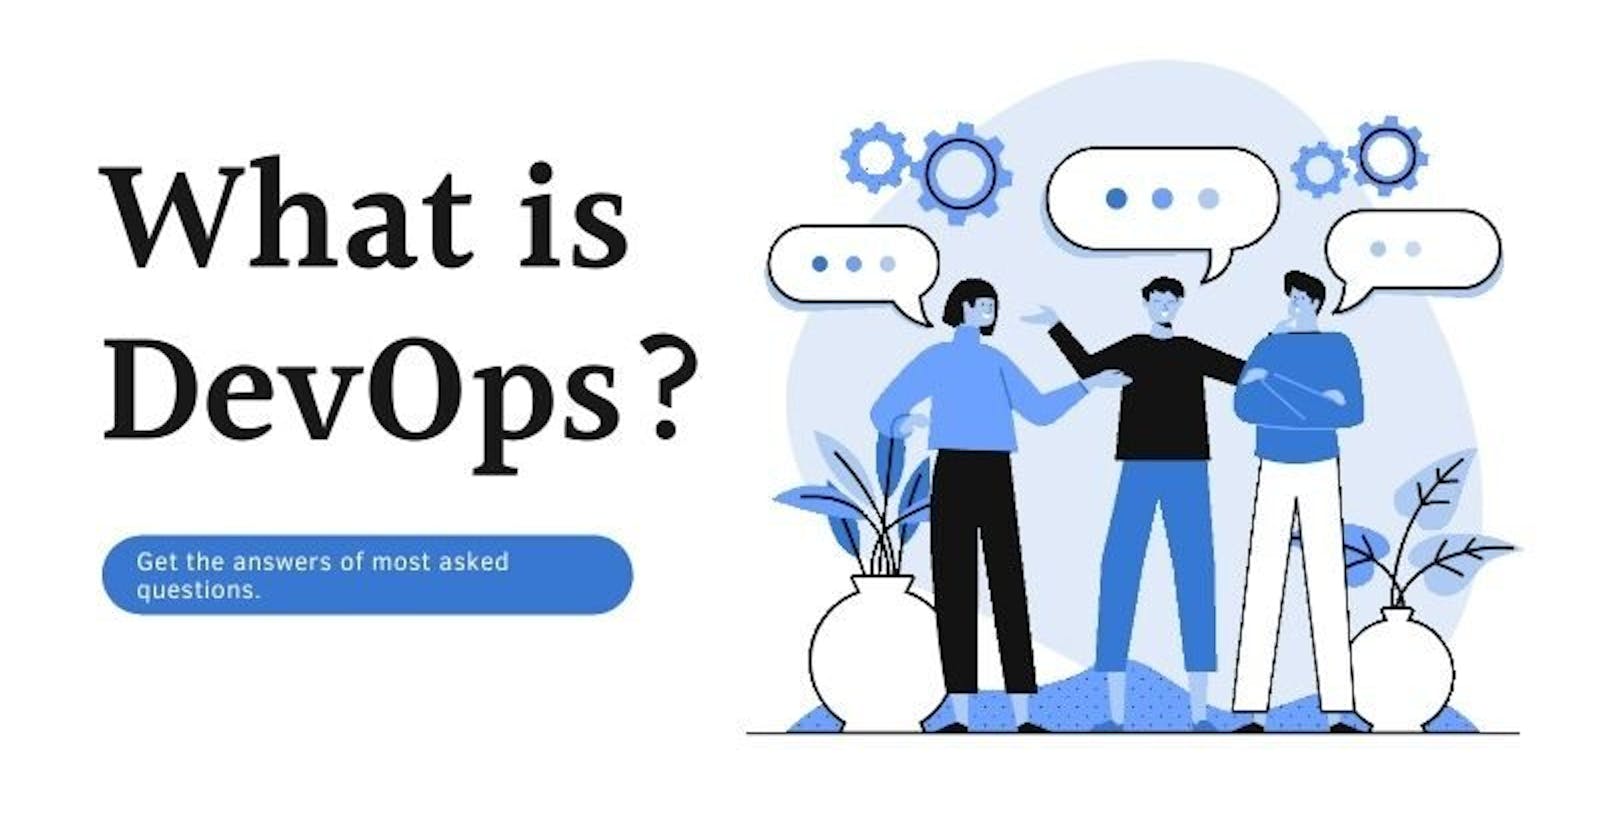 #Day 1 of 90 Days of DevOps Discoveries! 🚀